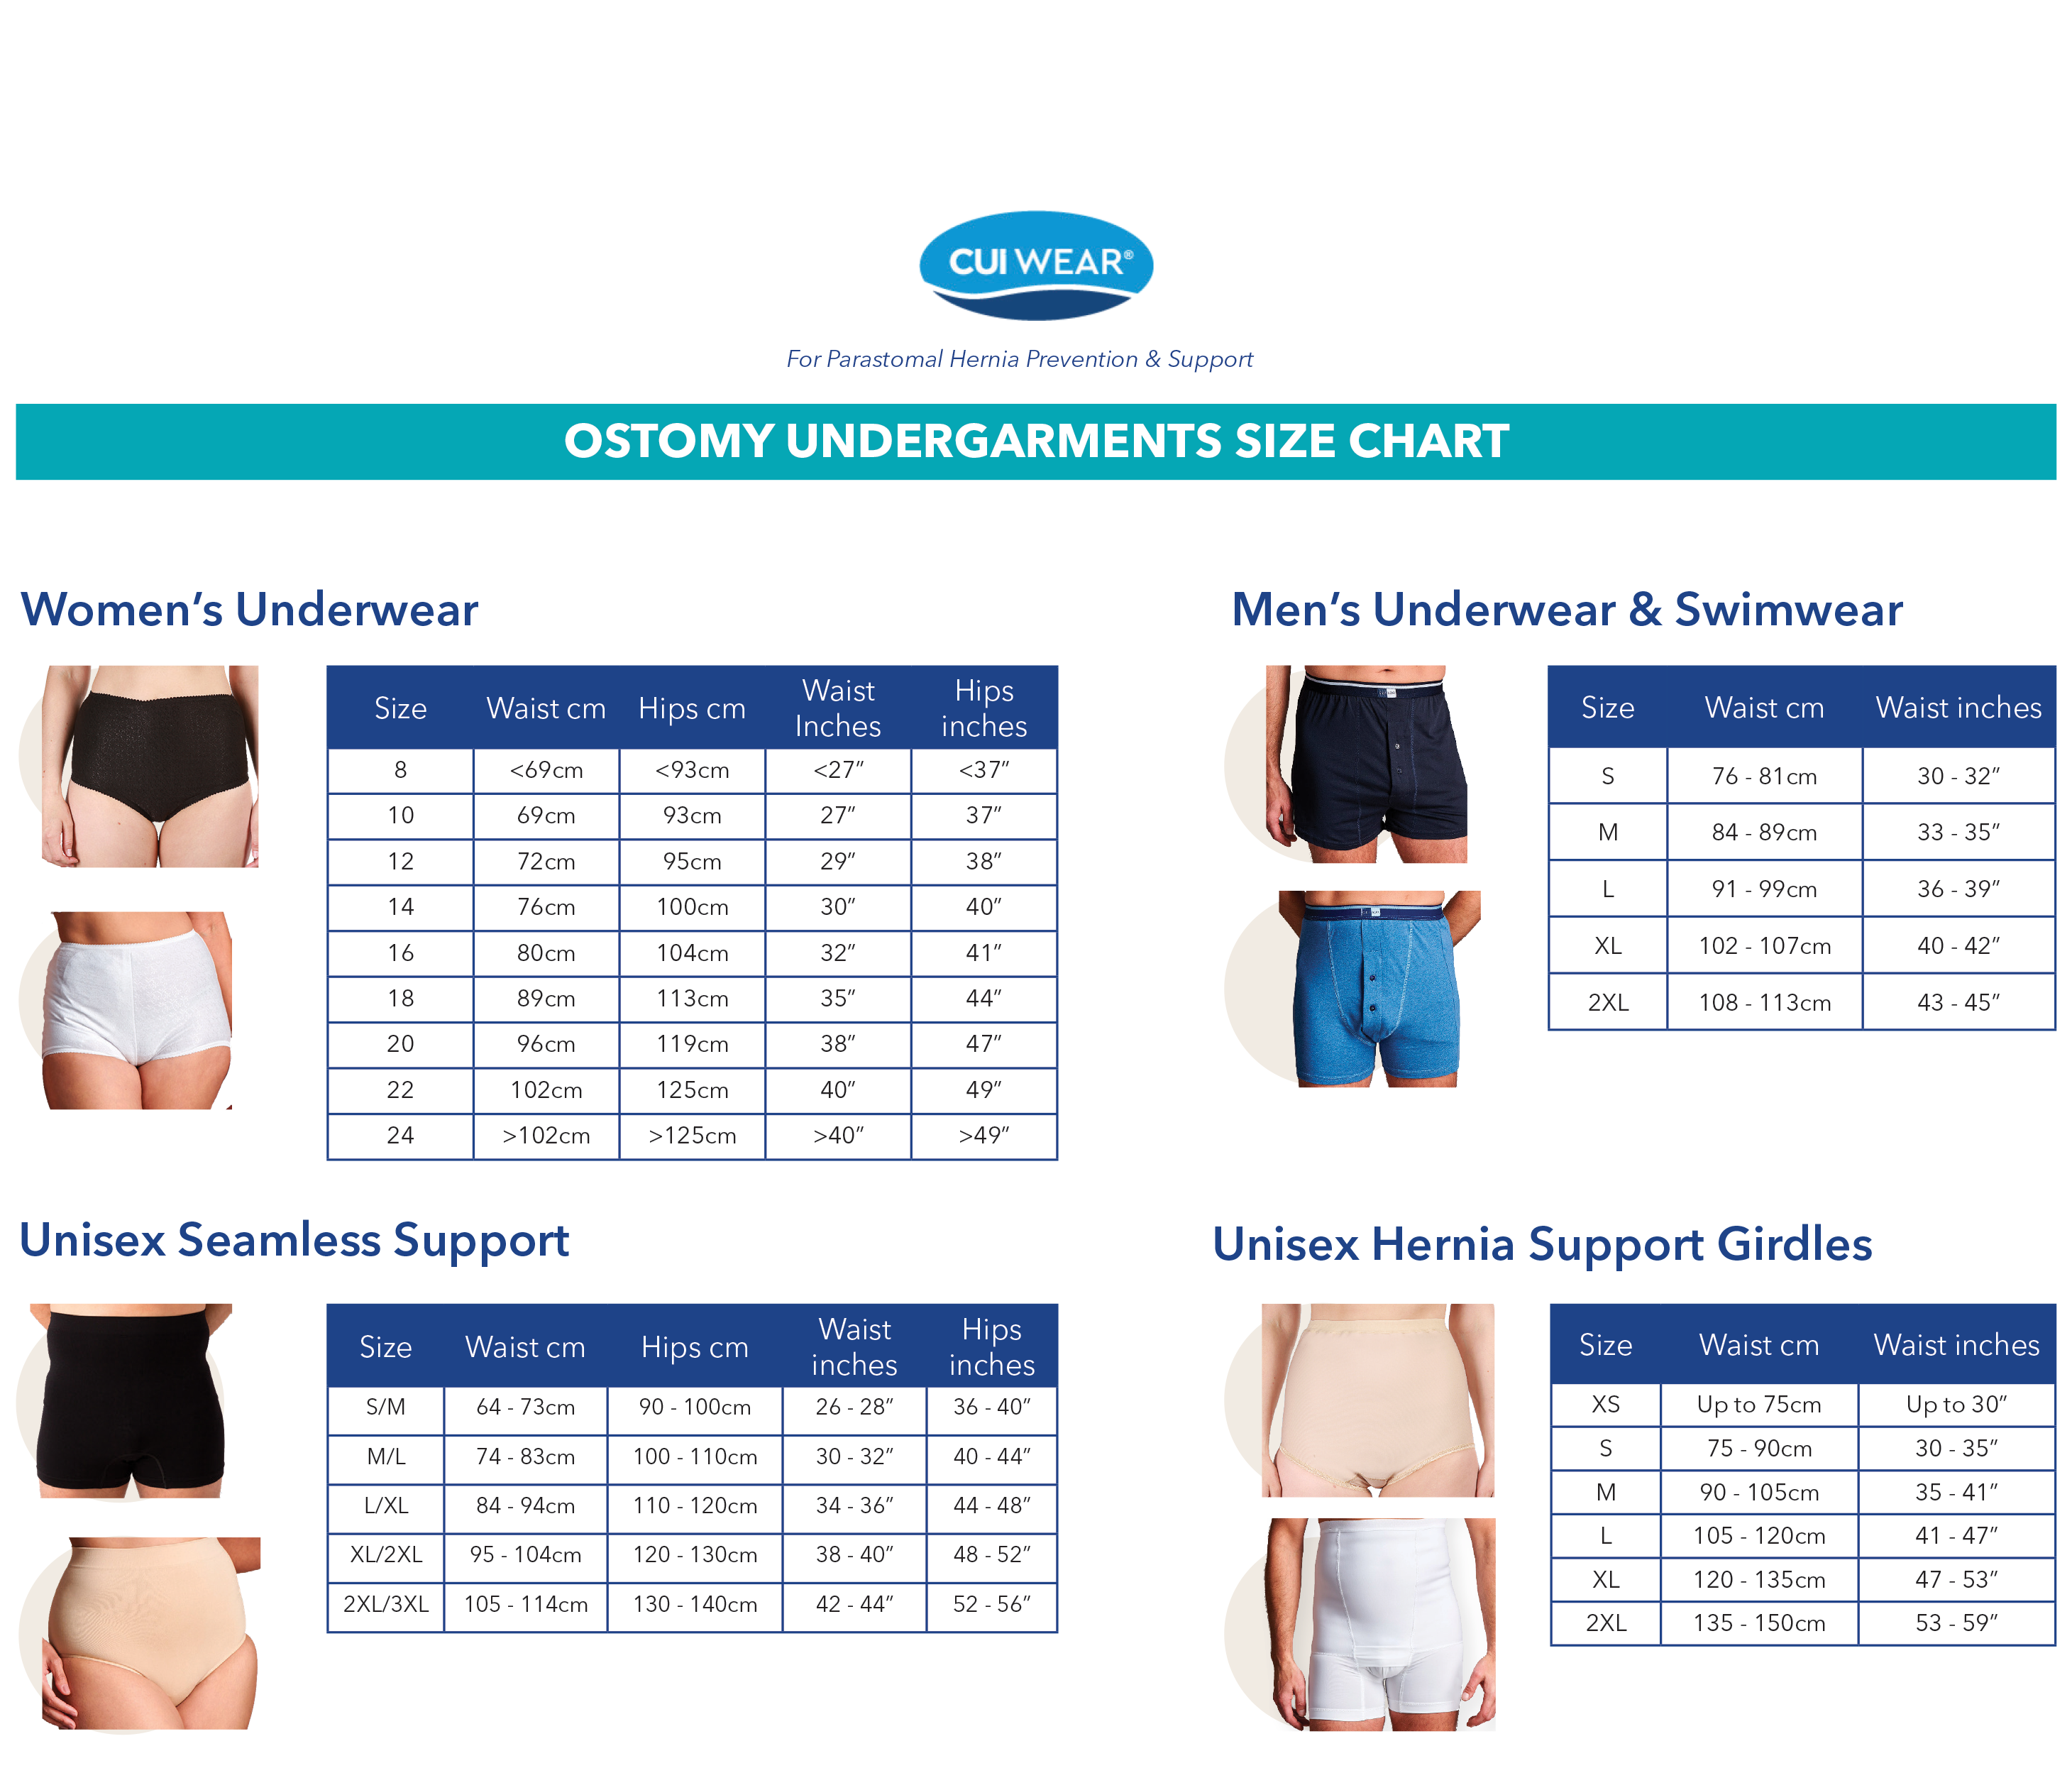 CUI Mens Hernia Low Waist Support Girdle With Legs - 1 each, LARGE, BLACK - 0